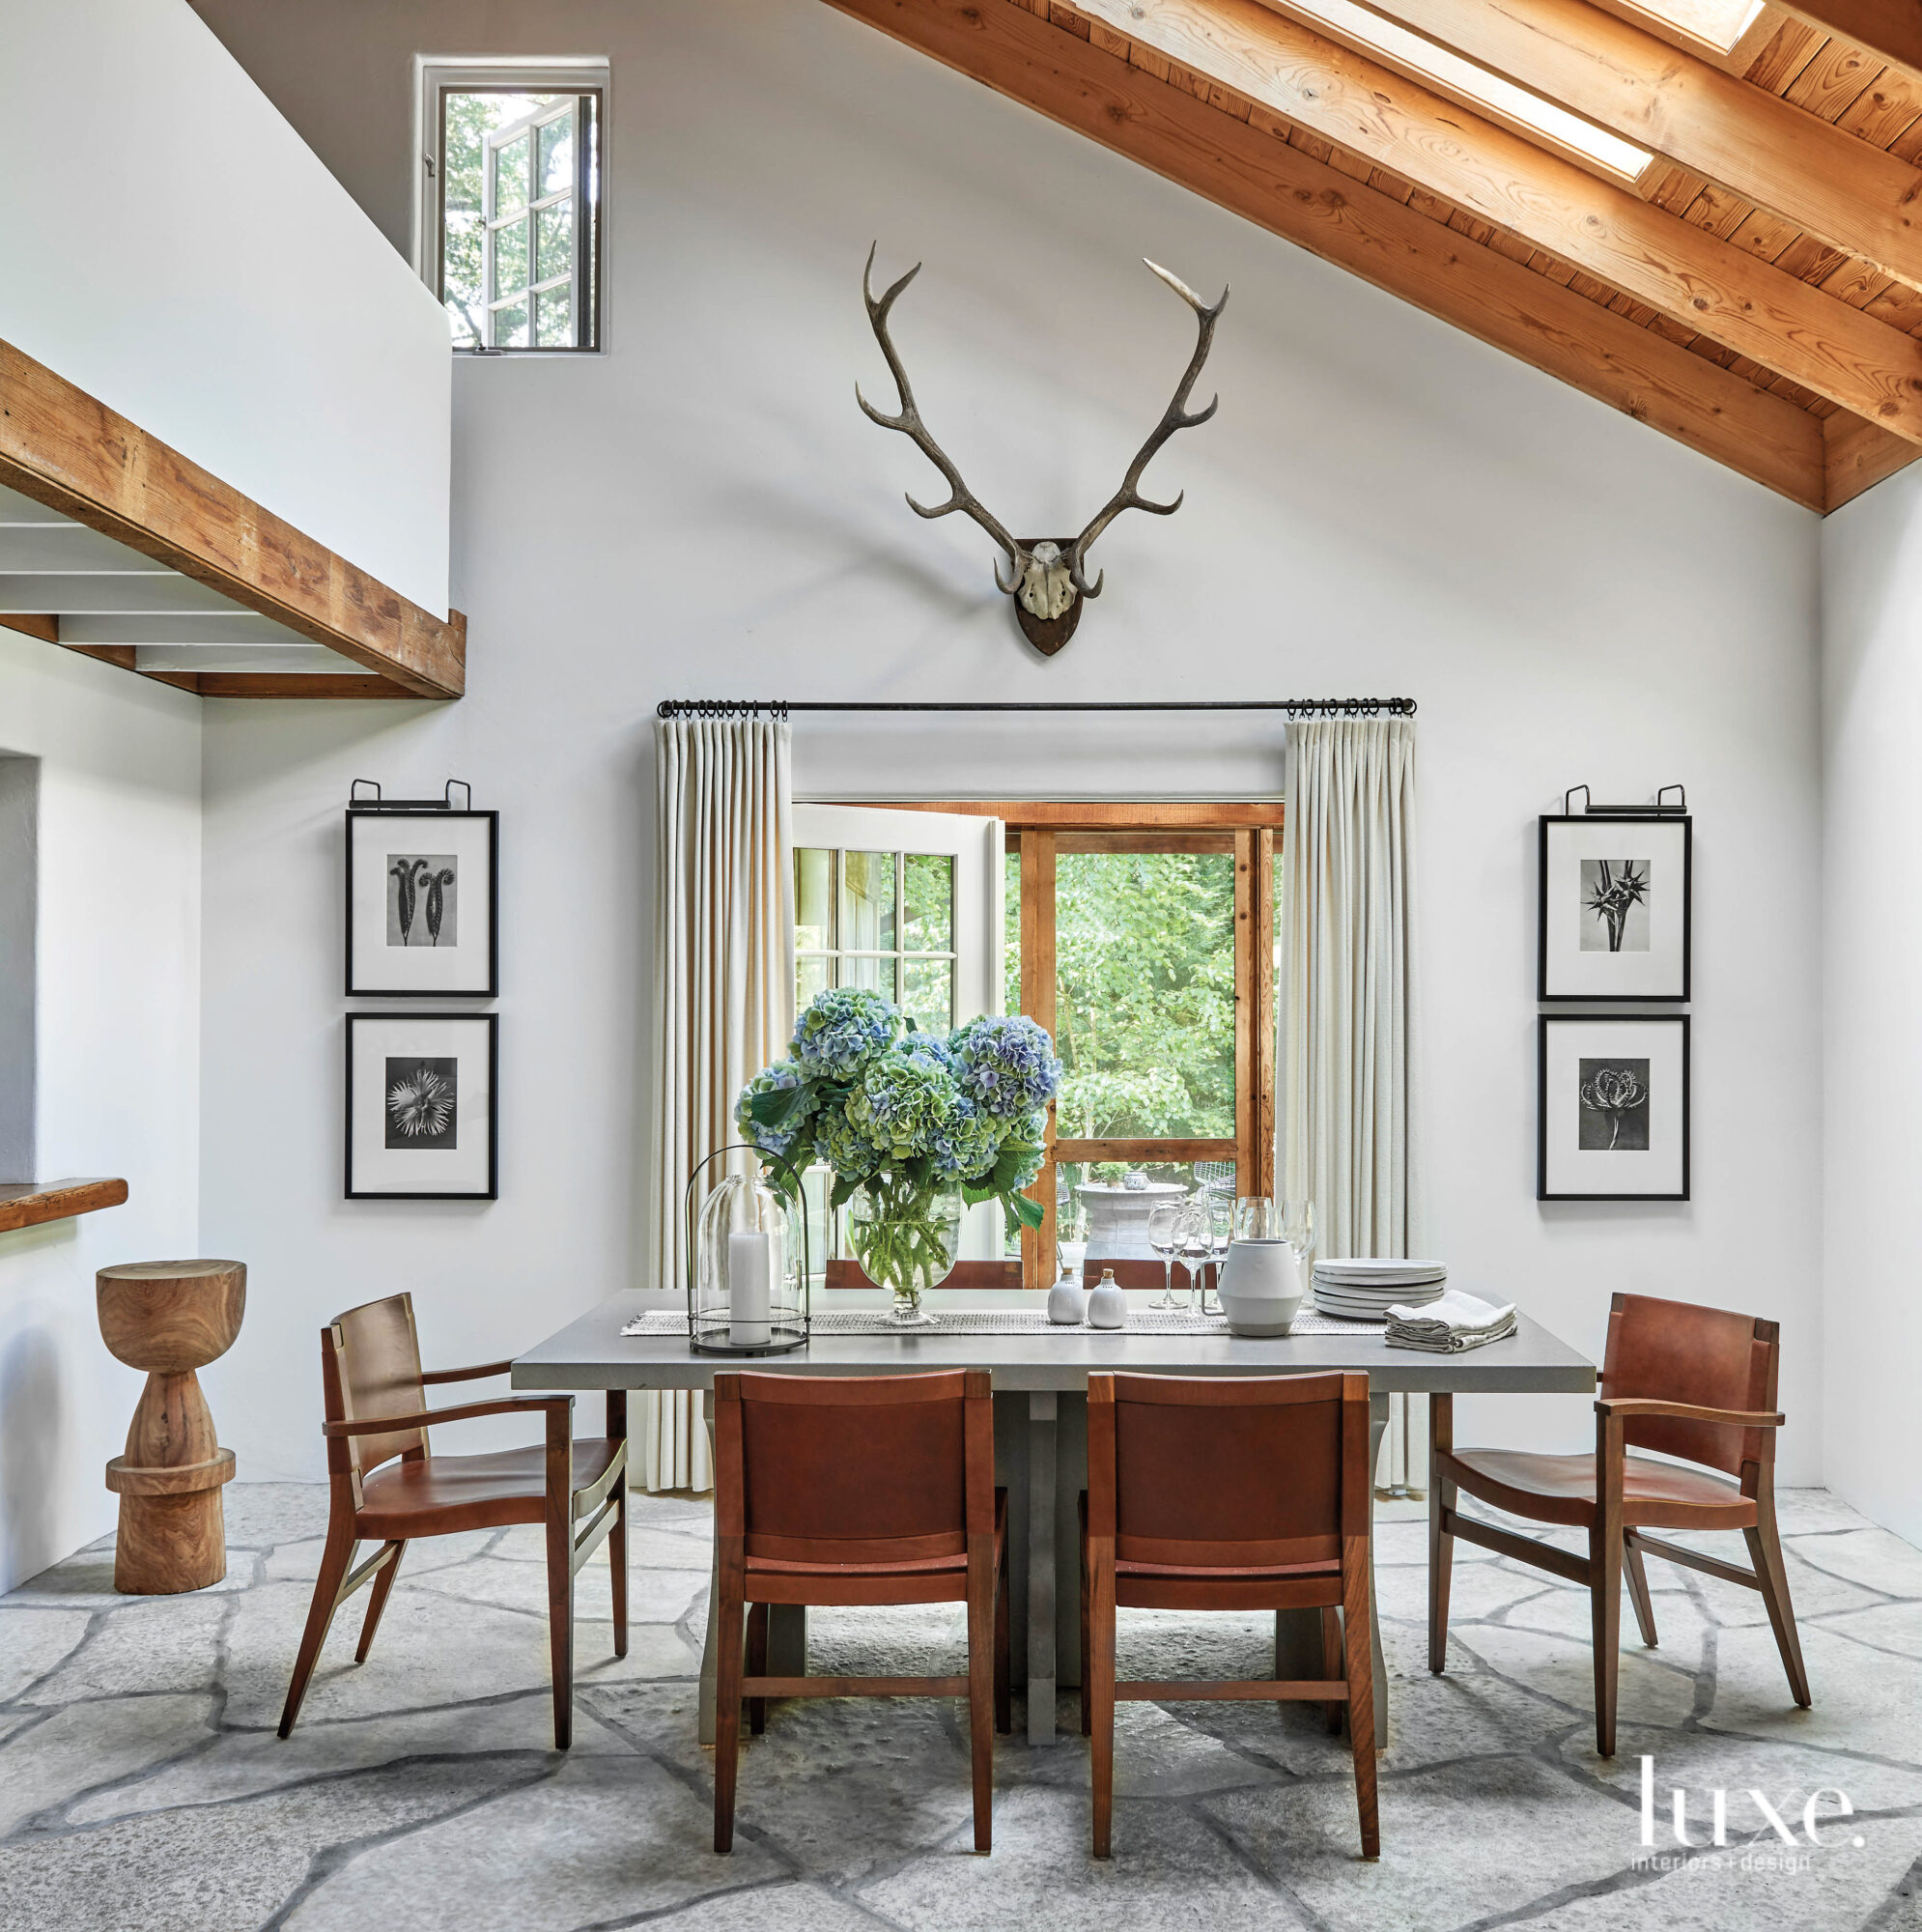 A simplistic, symmetrical dining room is decorated with wooden finishes.